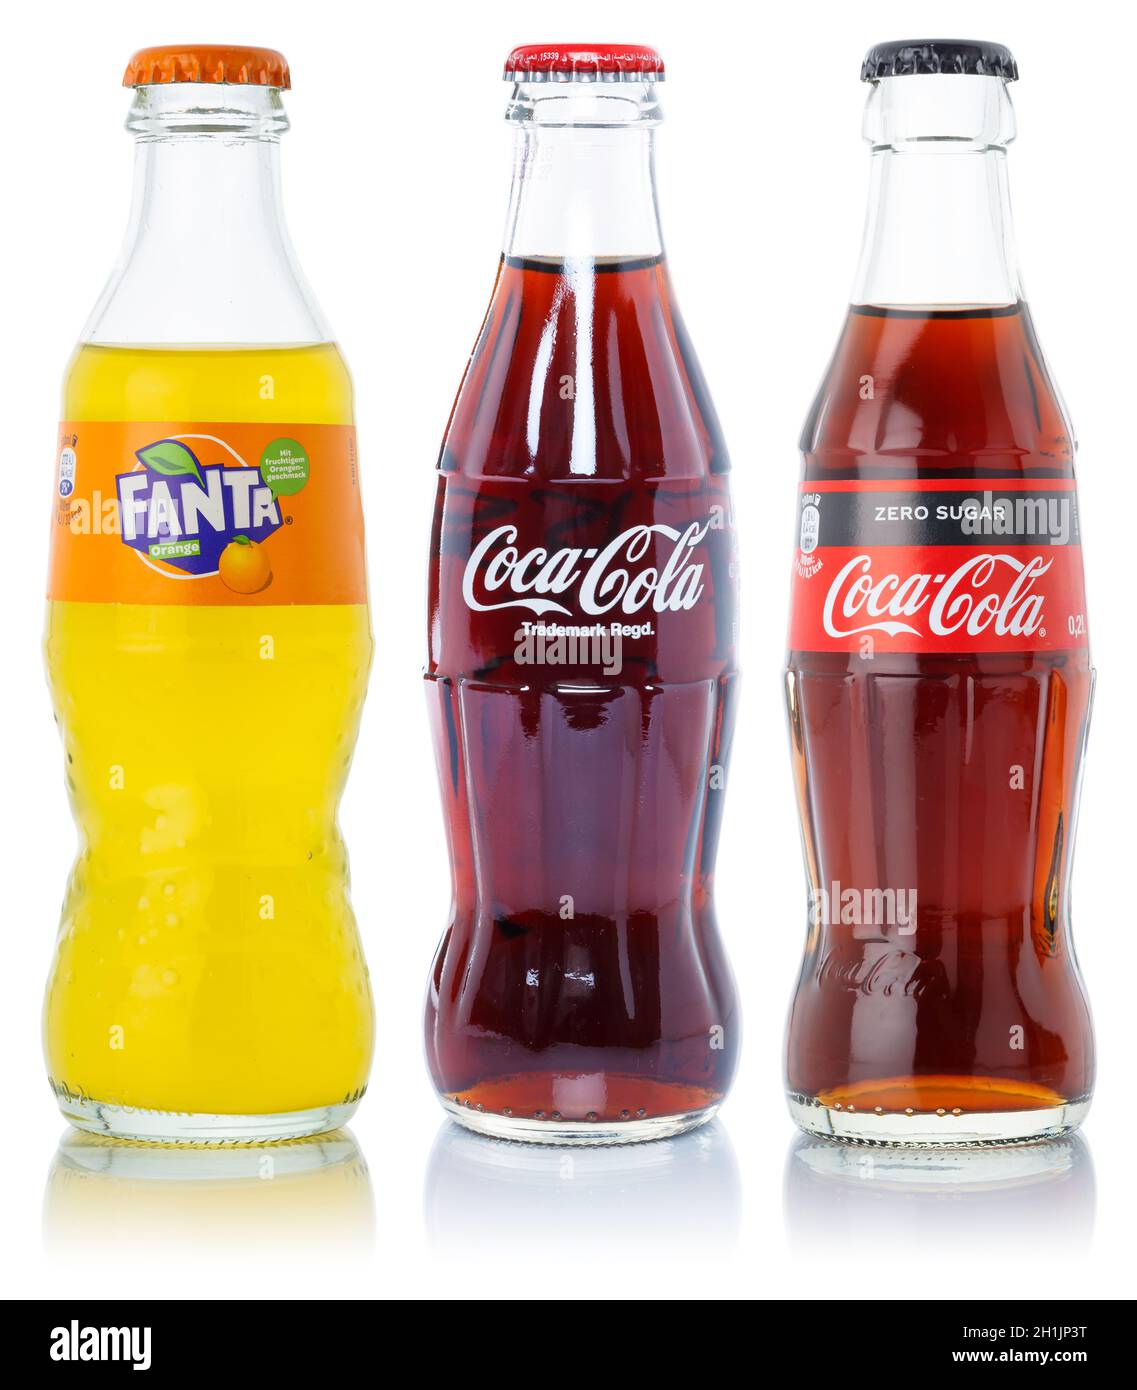 Stuttgart, Germany - August 24, 2021: Coca Cola Coca-Cola Fanta products lemonade drinks in bottles isolated on a white background Stuttgart, Germa Stock Photo - Alamy